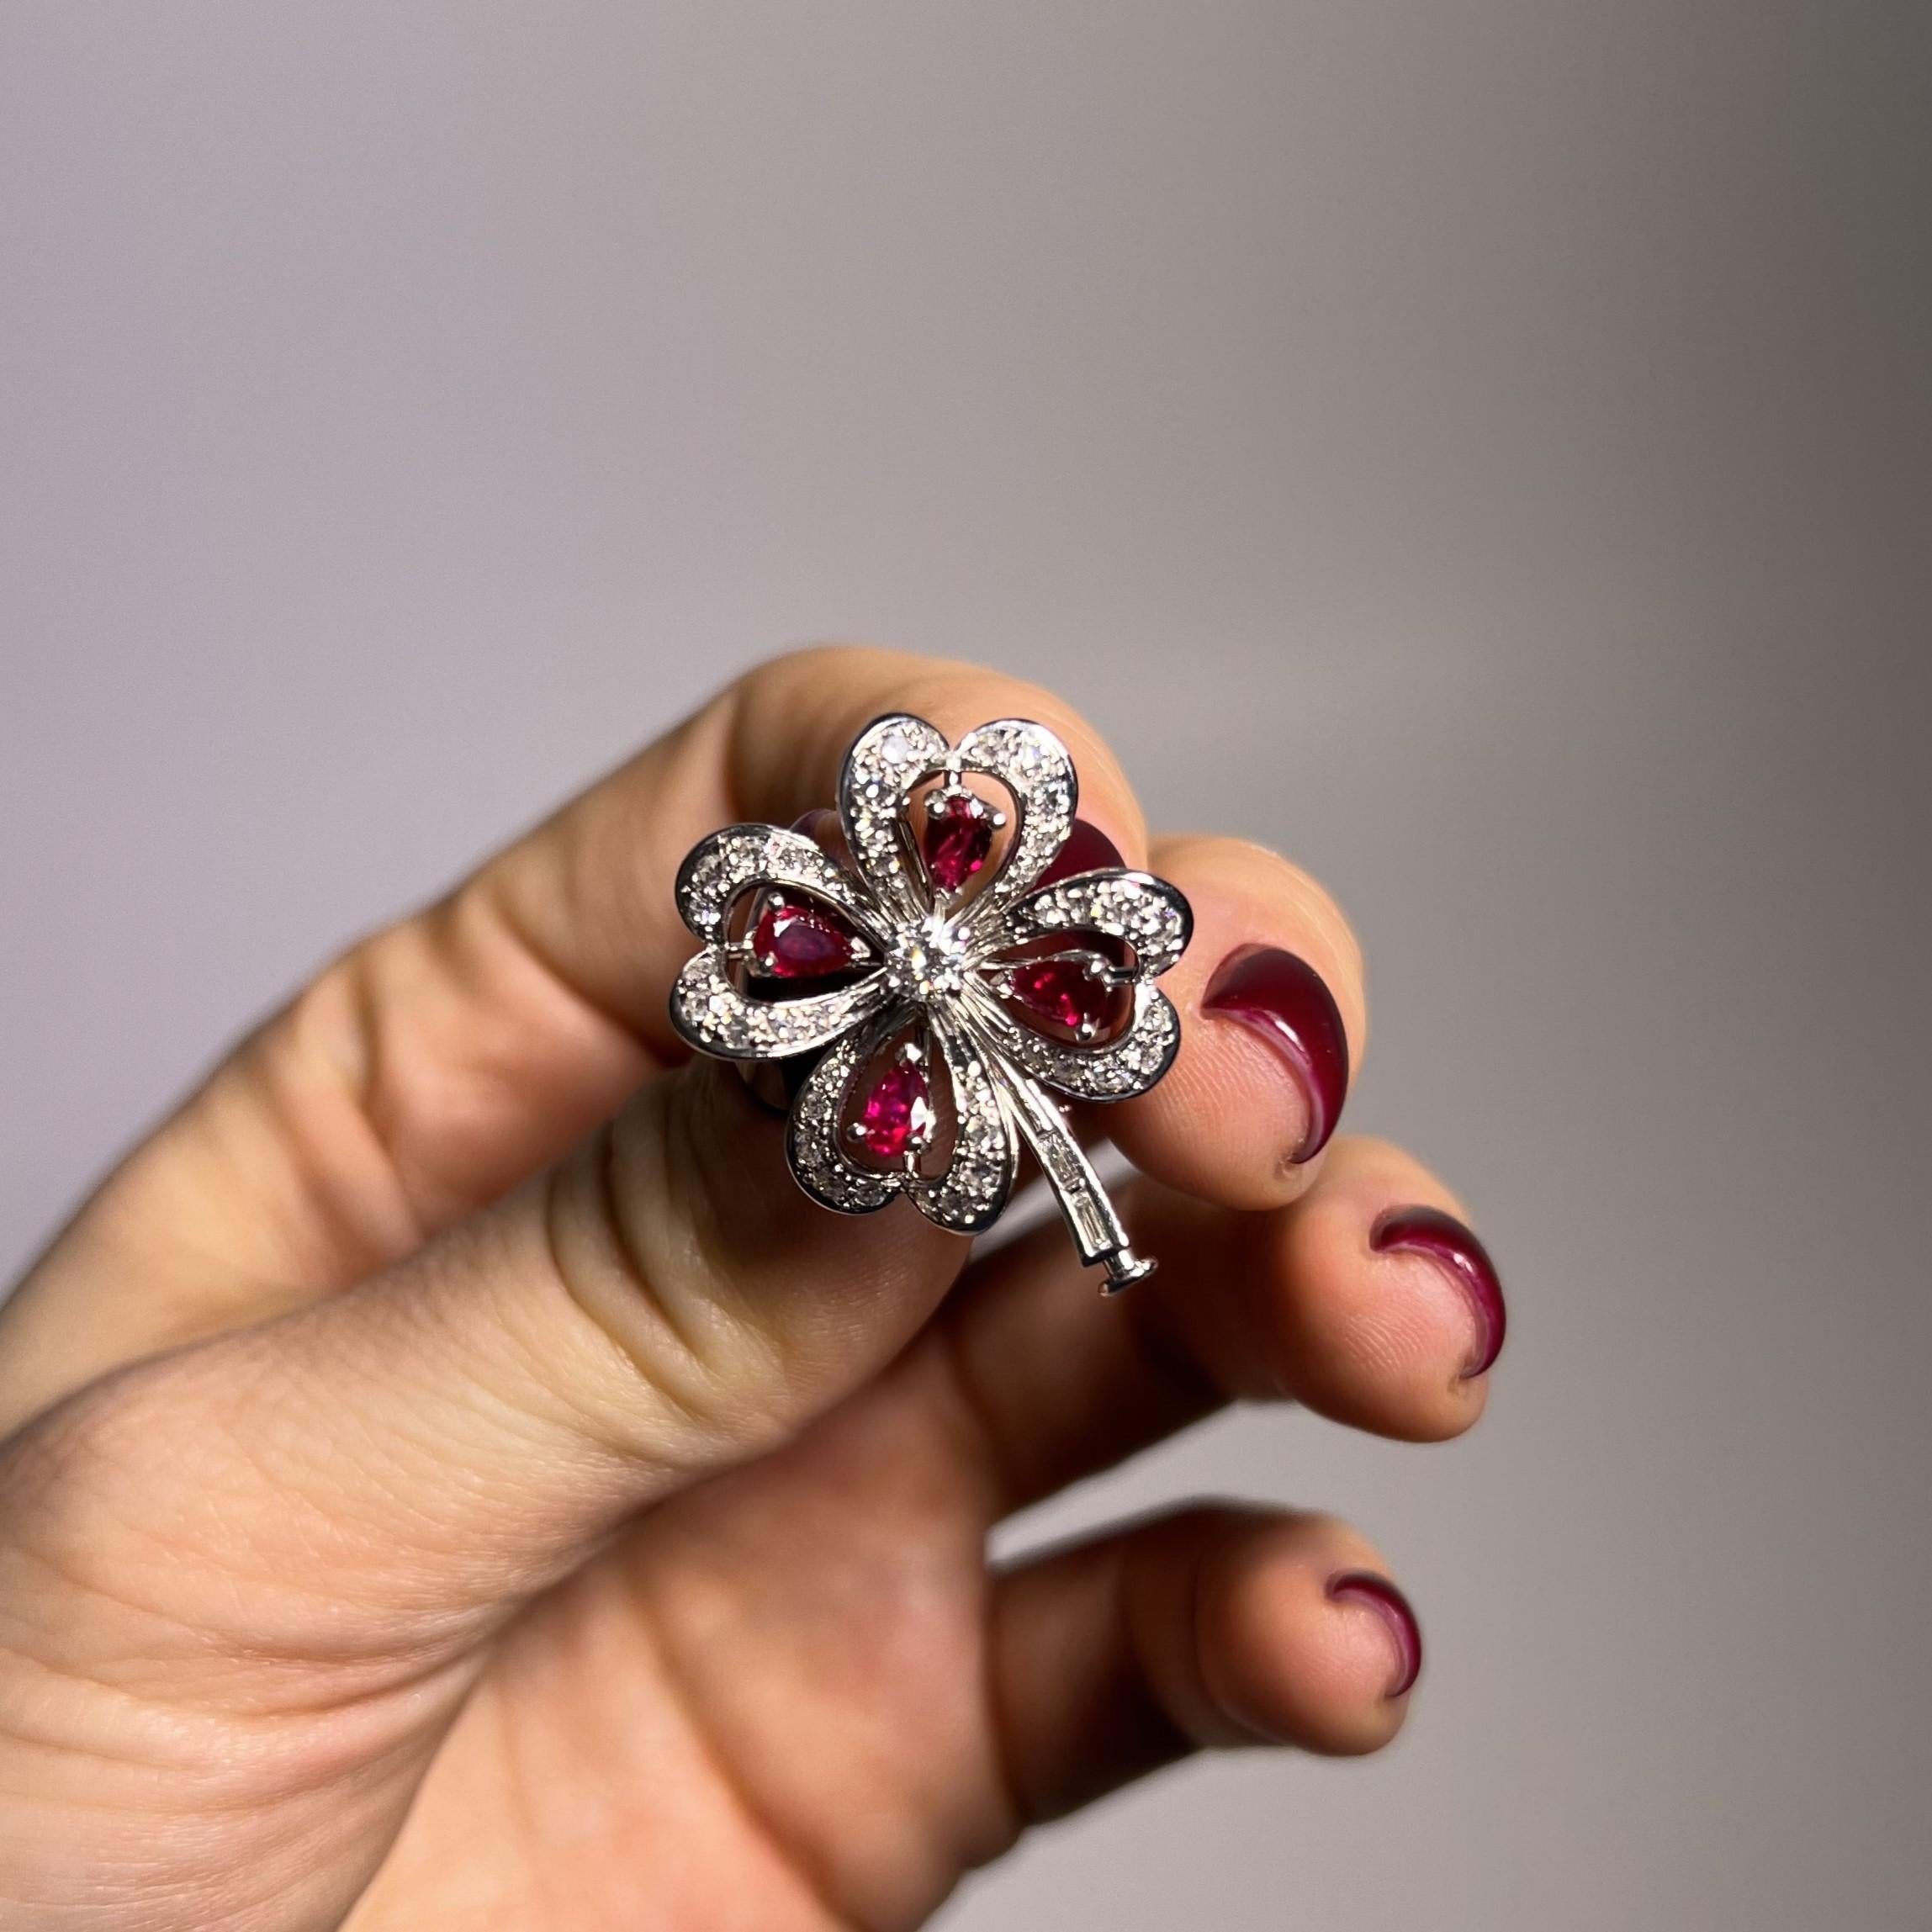 Clover Brooch with Rubies & Diamonds in 18 Karat White Gold by Meister 1